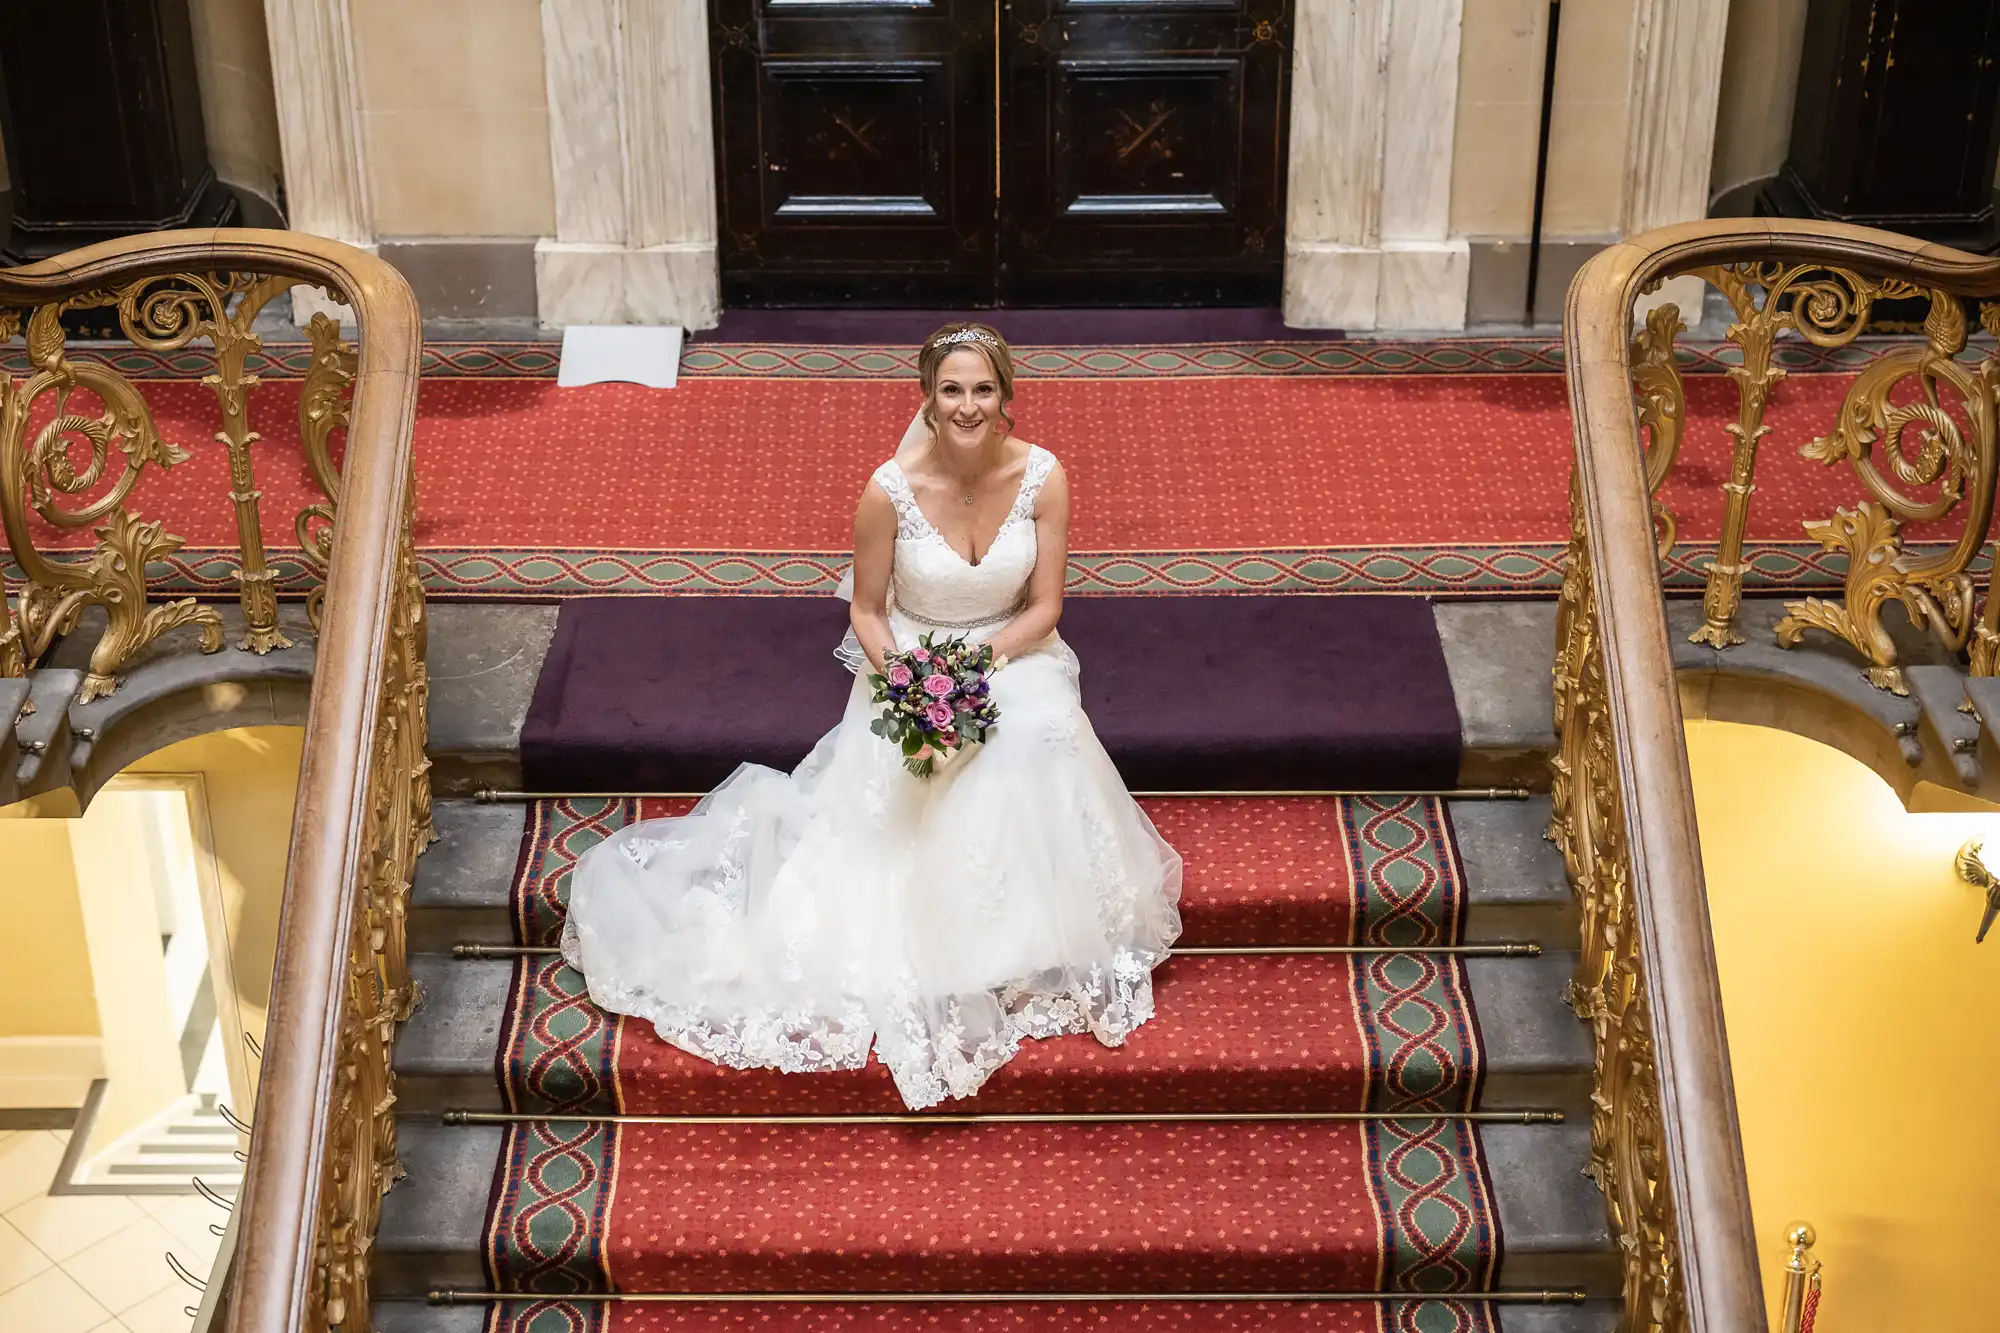 A woman in a white wedding dress sits on the steps of a grand staircase with red carpeting, holding a bouquet of flowers and smiling.